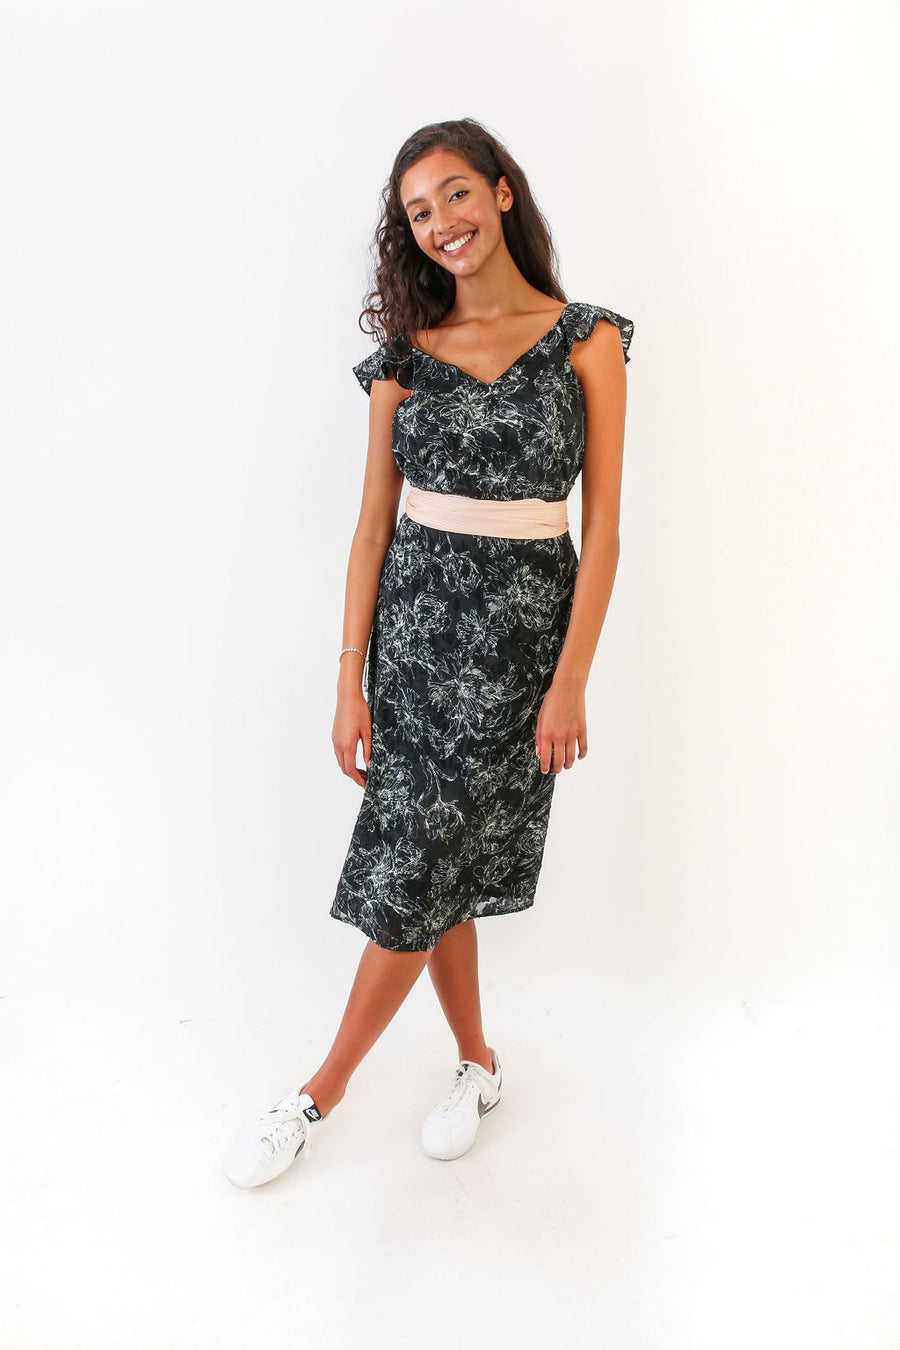 BELLA SKIRT BLACK CHIFFON WITH WHITE FLOWERS *LIMITED*EDITION*